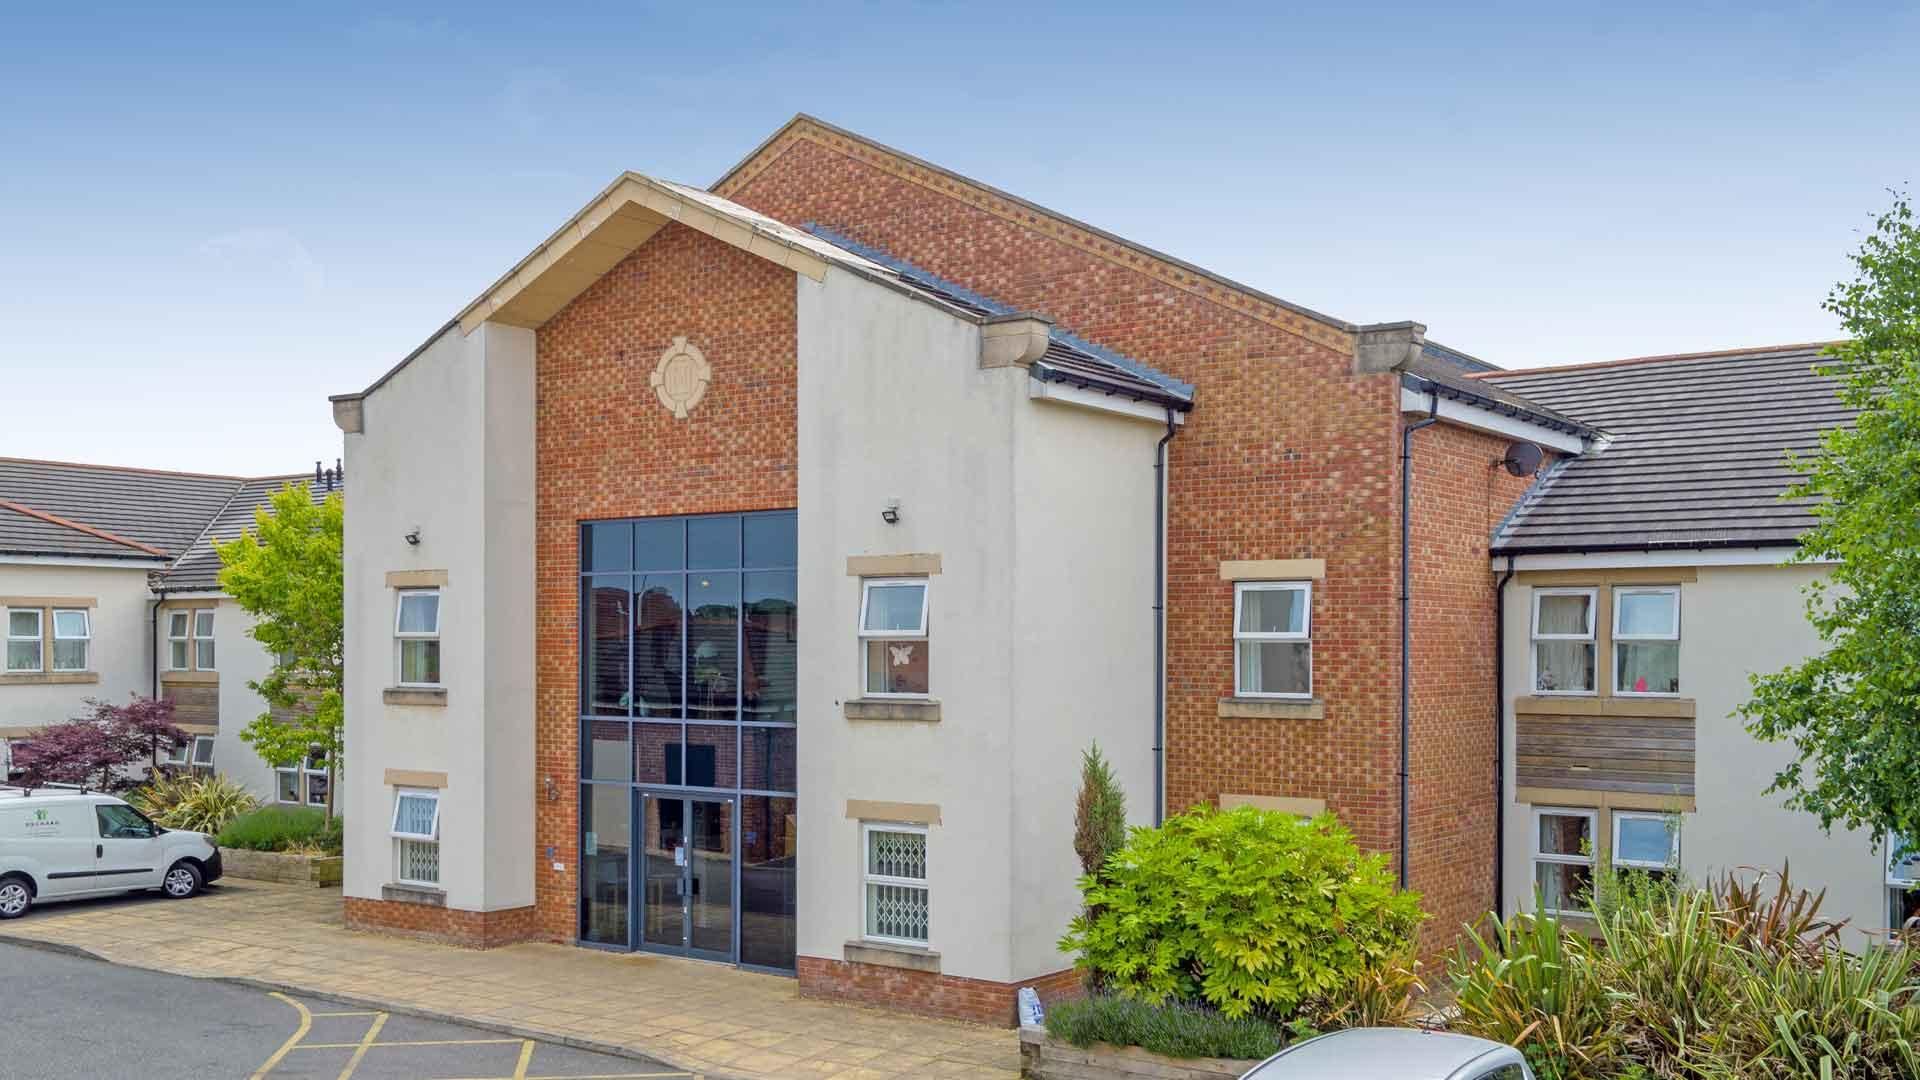 thornton hall & lodge care home in crosby